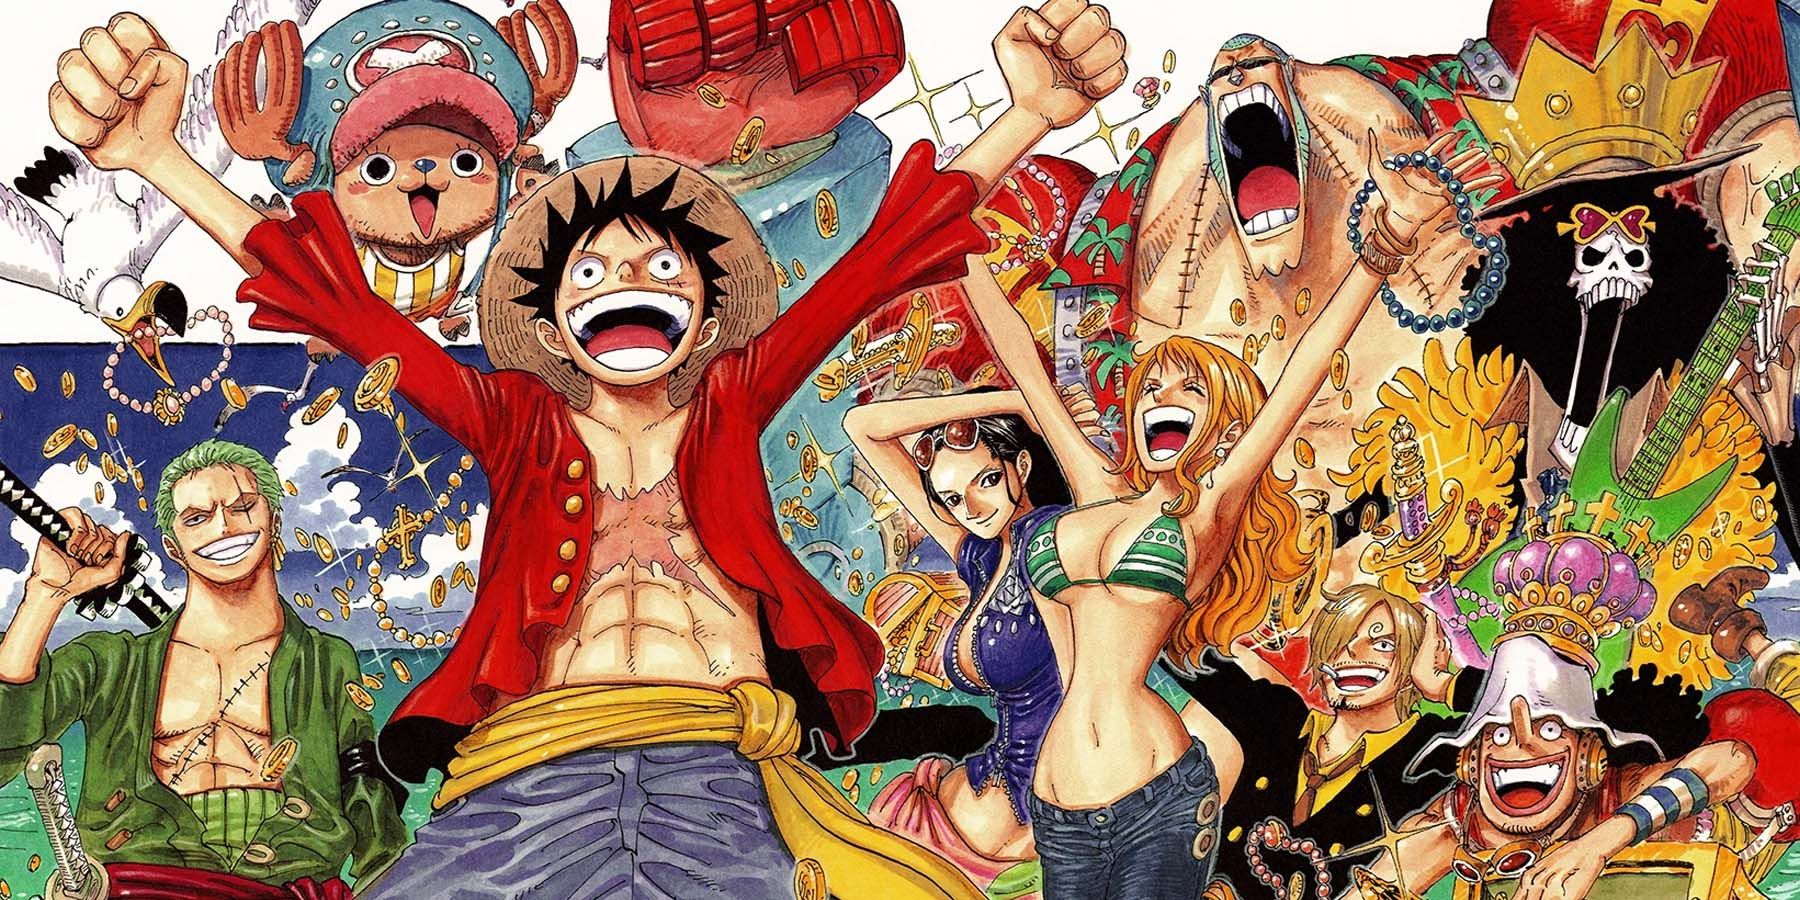 The Straw Hats celebrating in One Piece